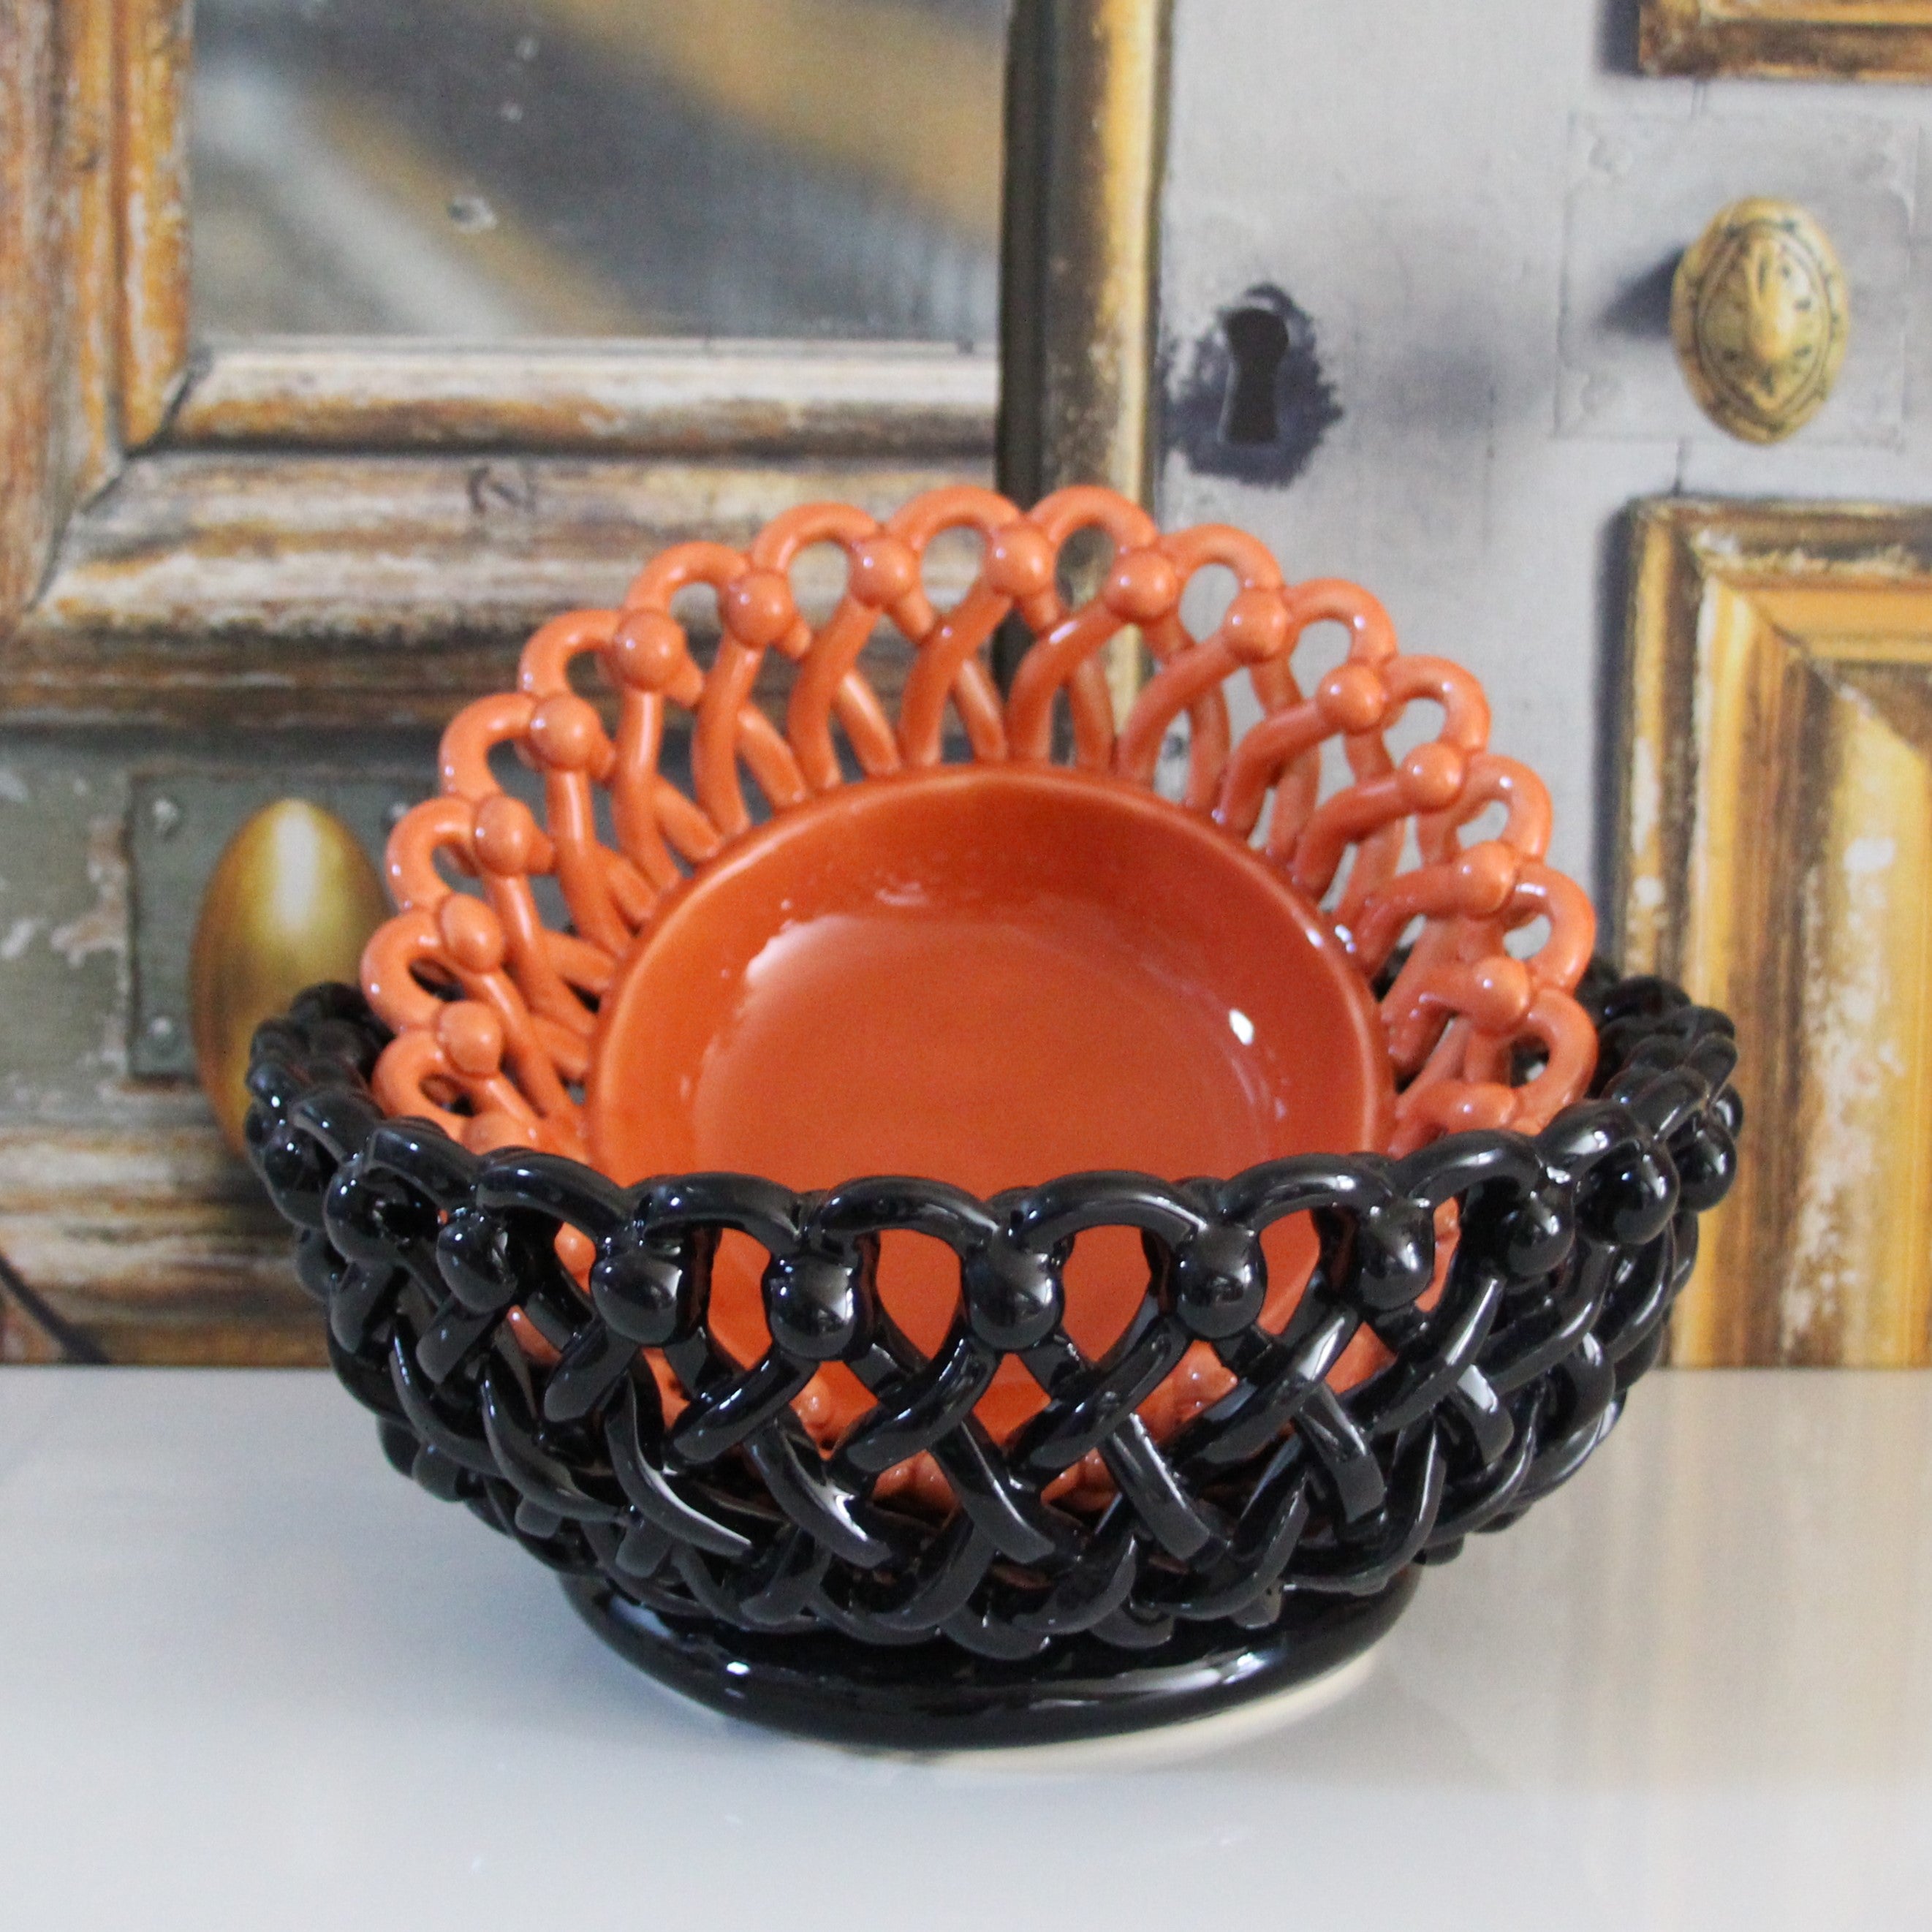 Design woven basket without base